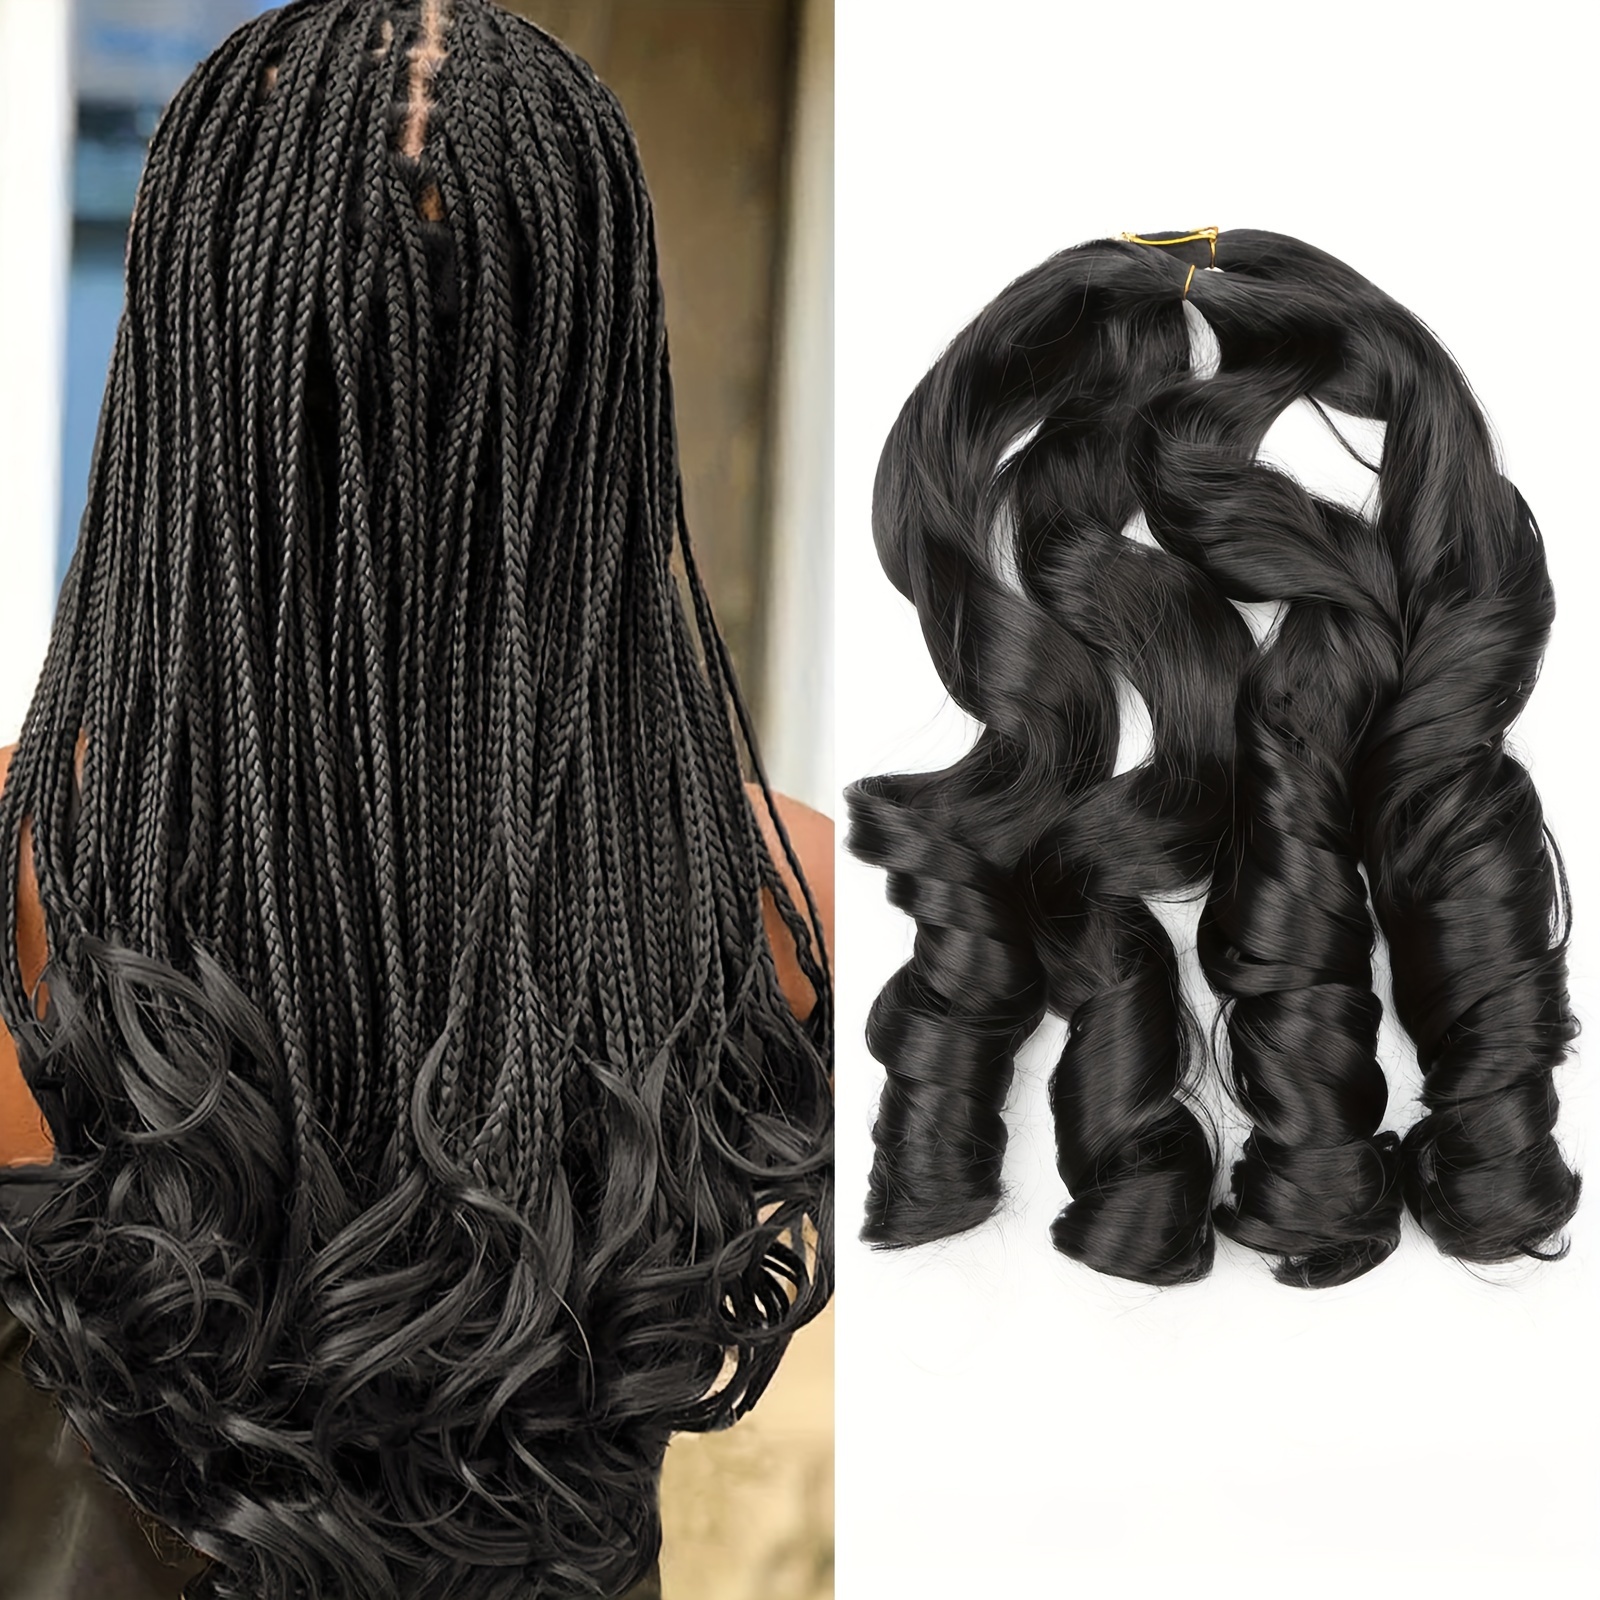 24Inch Long Curly Ends Box Braids Crochet Braiding Hair Extensions Black  Color Synthetic Box Braids With Wavy End Crochet Braids For Woman Girls 22